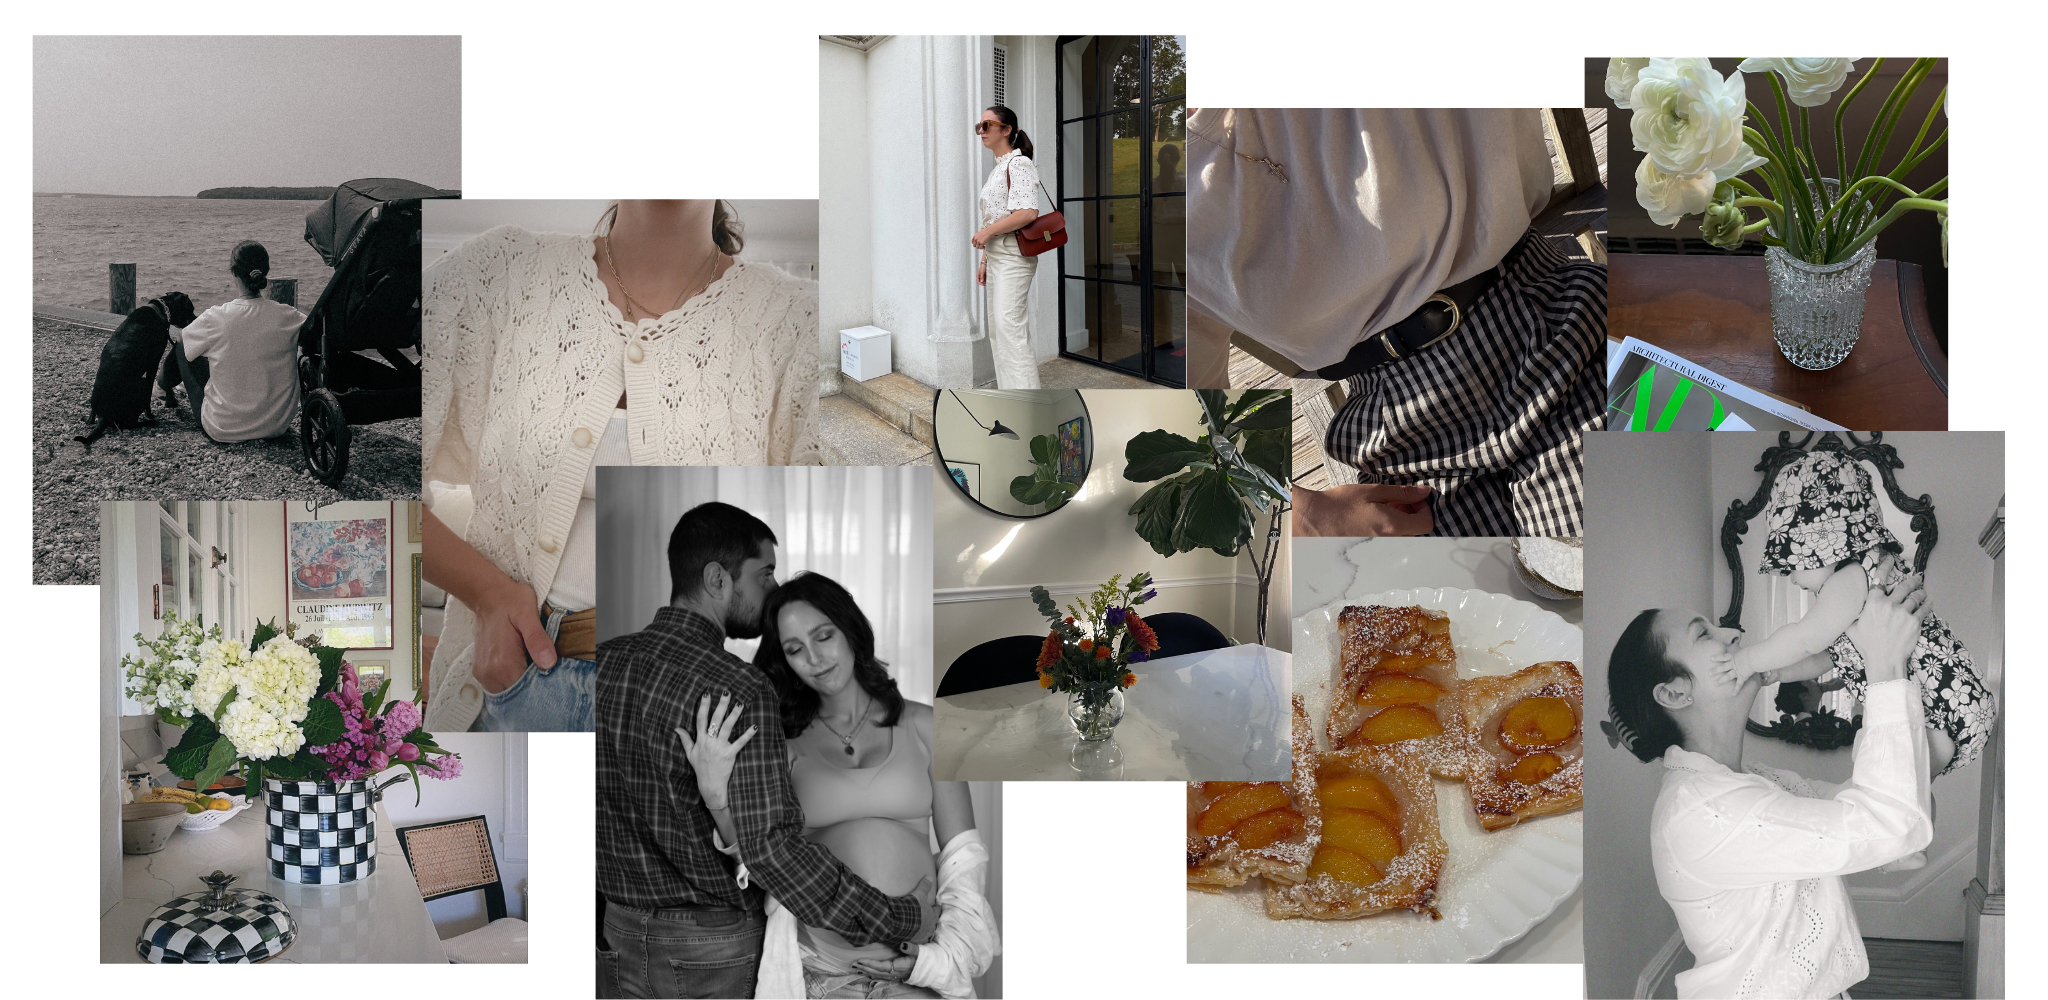 about me persoanl collage of family, my home, outfits and food